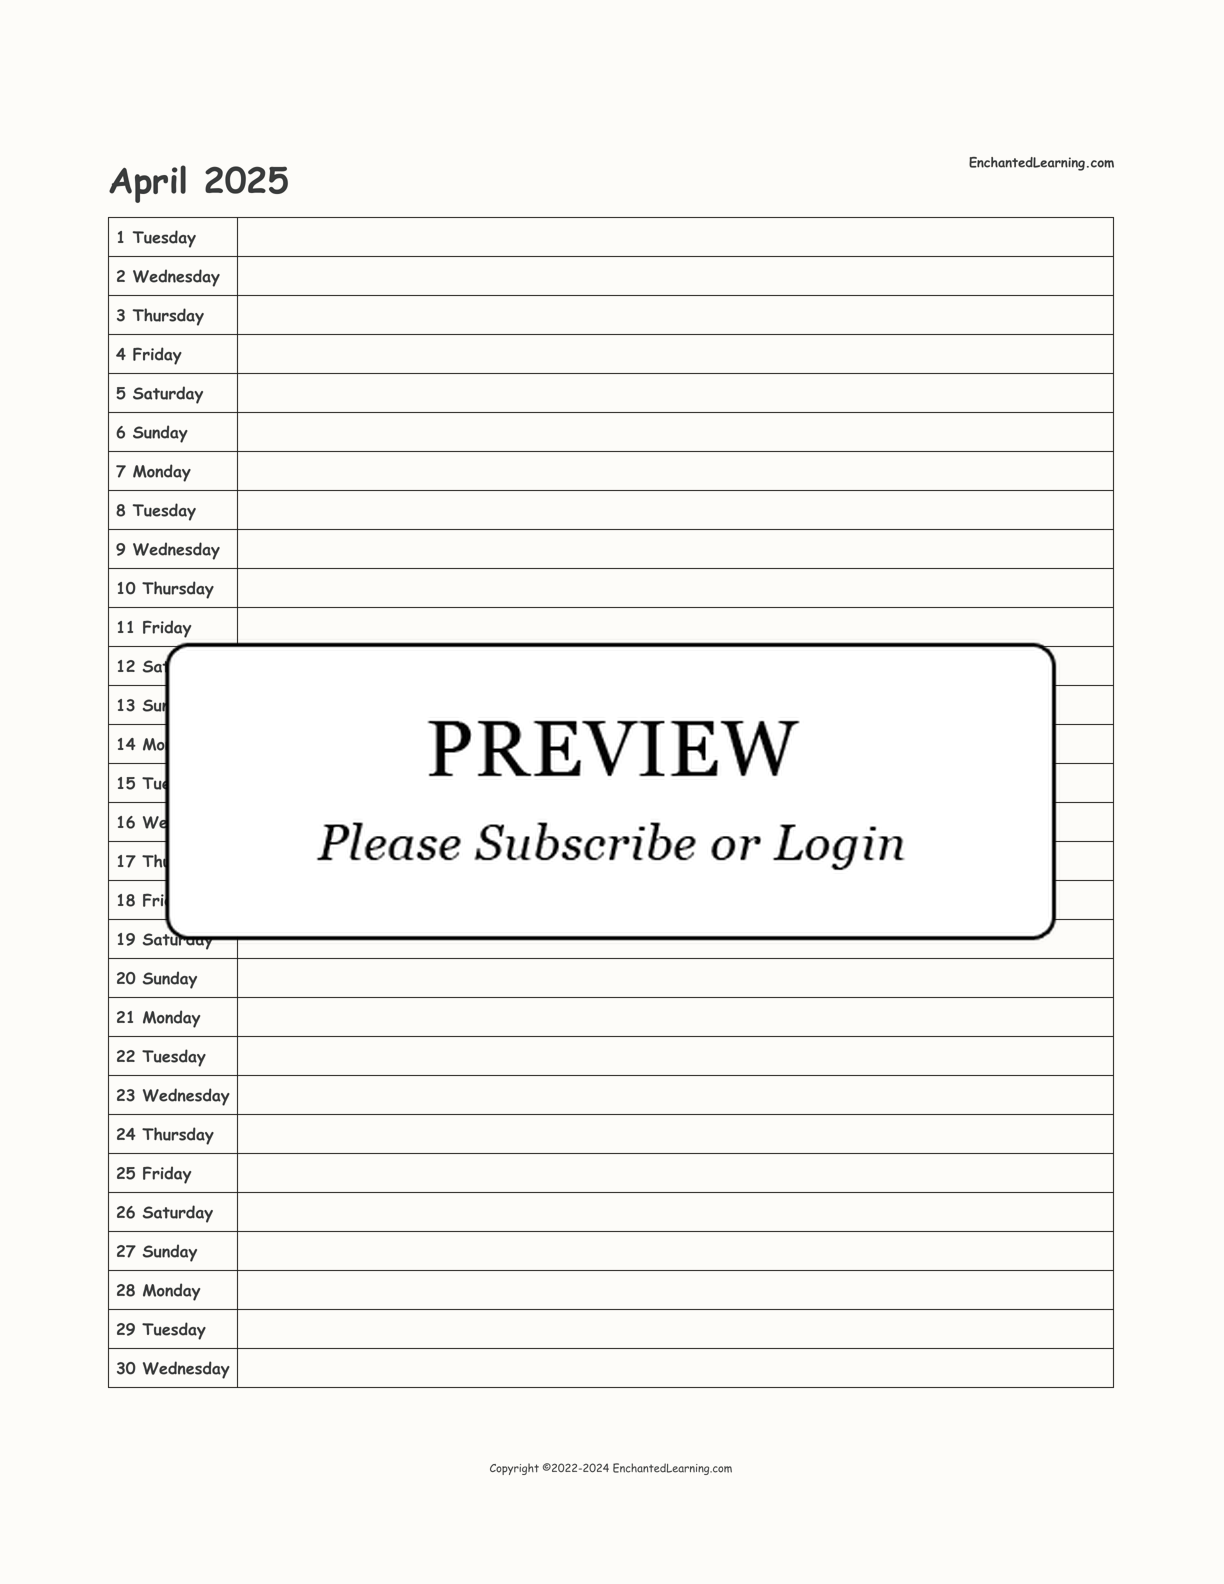 2025 Scheduling Calendar interactive printout page 4